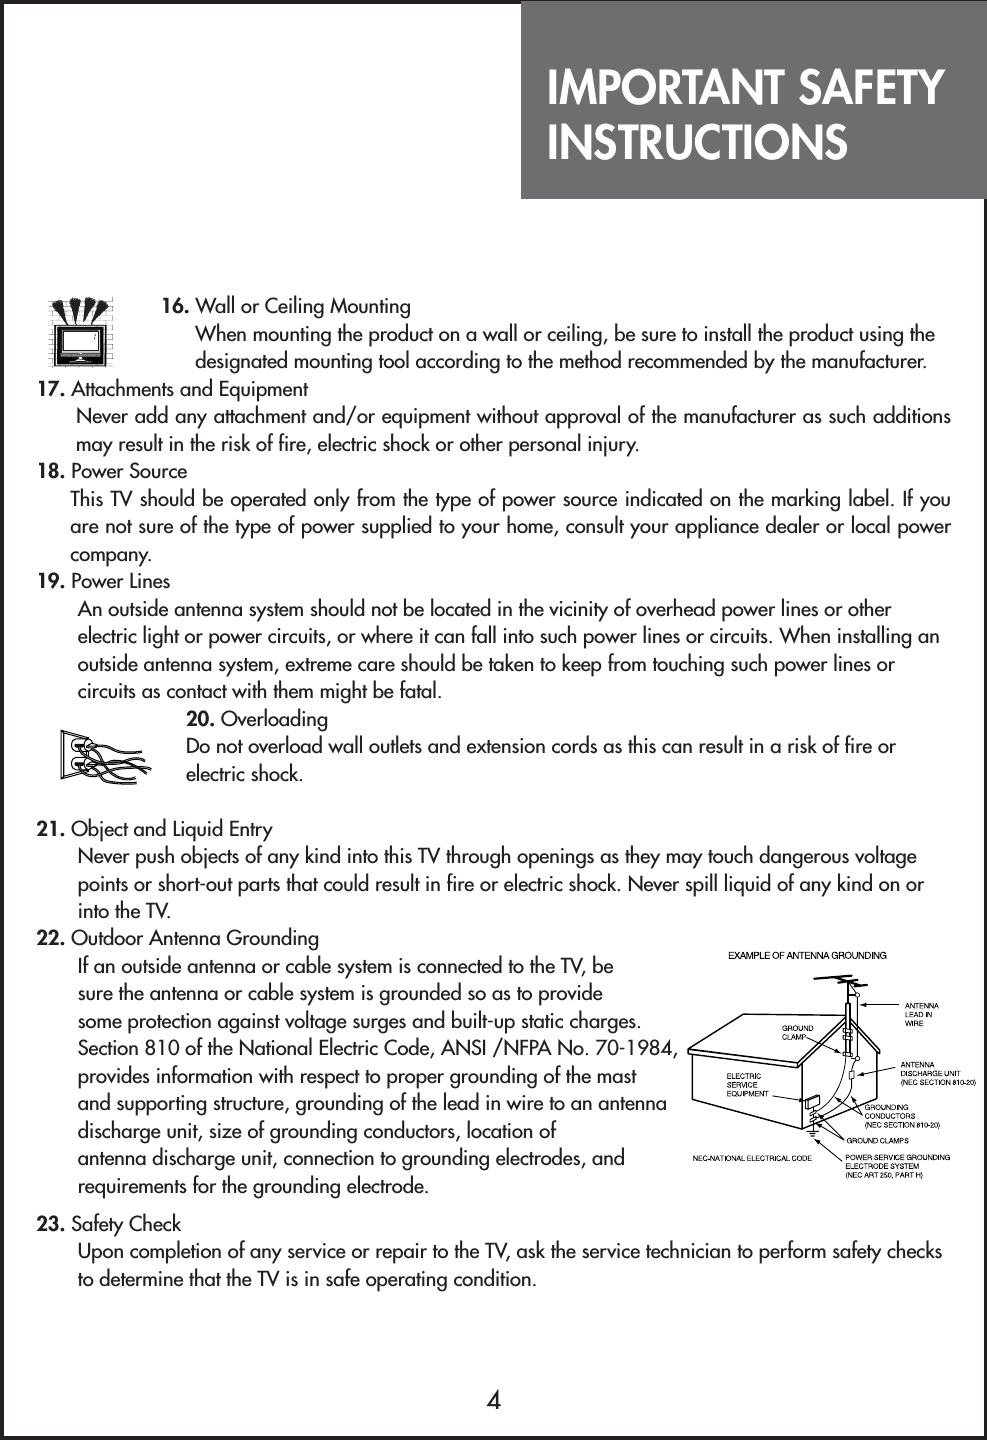 IMPORTANT SAFETYINSTRUCTIONS416. Wall or Ceiling MountingWhen mounting the product on a wall or ceiling, be sure to install the product using thedesignated mounting tool according to the method recommended by the manufacturer.17. Attachments and EquipmentNever add any attachment and/or equipment without approval of the manufacturer as such additionsmay result in the risk of fire, electric shock or other personal injury.18. Power SourceThis TV should be operated only from the type of power source indicated on the marking label. If youare not sure of the type of power supplied to your home, consult your appliance dealer or local powercompany.19. Power LinesAn outside antenna system should not be located in the vicinity of overhead power lines or otherelectric light or power circuits, or where it can fall into such power lines or circuits. When installing anoutside antenna system, extreme care should be taken to keep from touching such power lines orcircuits as contact with them might be fatal.20. OverloadingDo not overload wall outlets and extension cords as this can result in a risk of fire orelectric shock.21. Object and Liquid EntryNever push objects of any kind into this TV through openings as they may touch dangerous voltagepoints or short-out parts that could result in fire or electric shock. Never spill liquid of any kind on orinto the TV.22. Outdoor Antenna GroundingIf an outside antenna or cable system is connected to the TV, besure the antenna or cable system is grounded so as to providesome protection against voltage surges and built-up static charges.Section 810 of the National Electric Code, ANSI /NFPA No. 70-1984,provides information with respect to proper grounding of the mastand supporting structure, grounding of the lead in wire to an antennadischarge unit, size of grounding conductors, location ofantenna discharge unit, connection to grounding electrodes, andrequirements for the grounding electrode.23. Safety CheckUpon completion of any service or repair to the TV, ask the service technician to perform safety checksto determine that the TV is in safe operating condition.